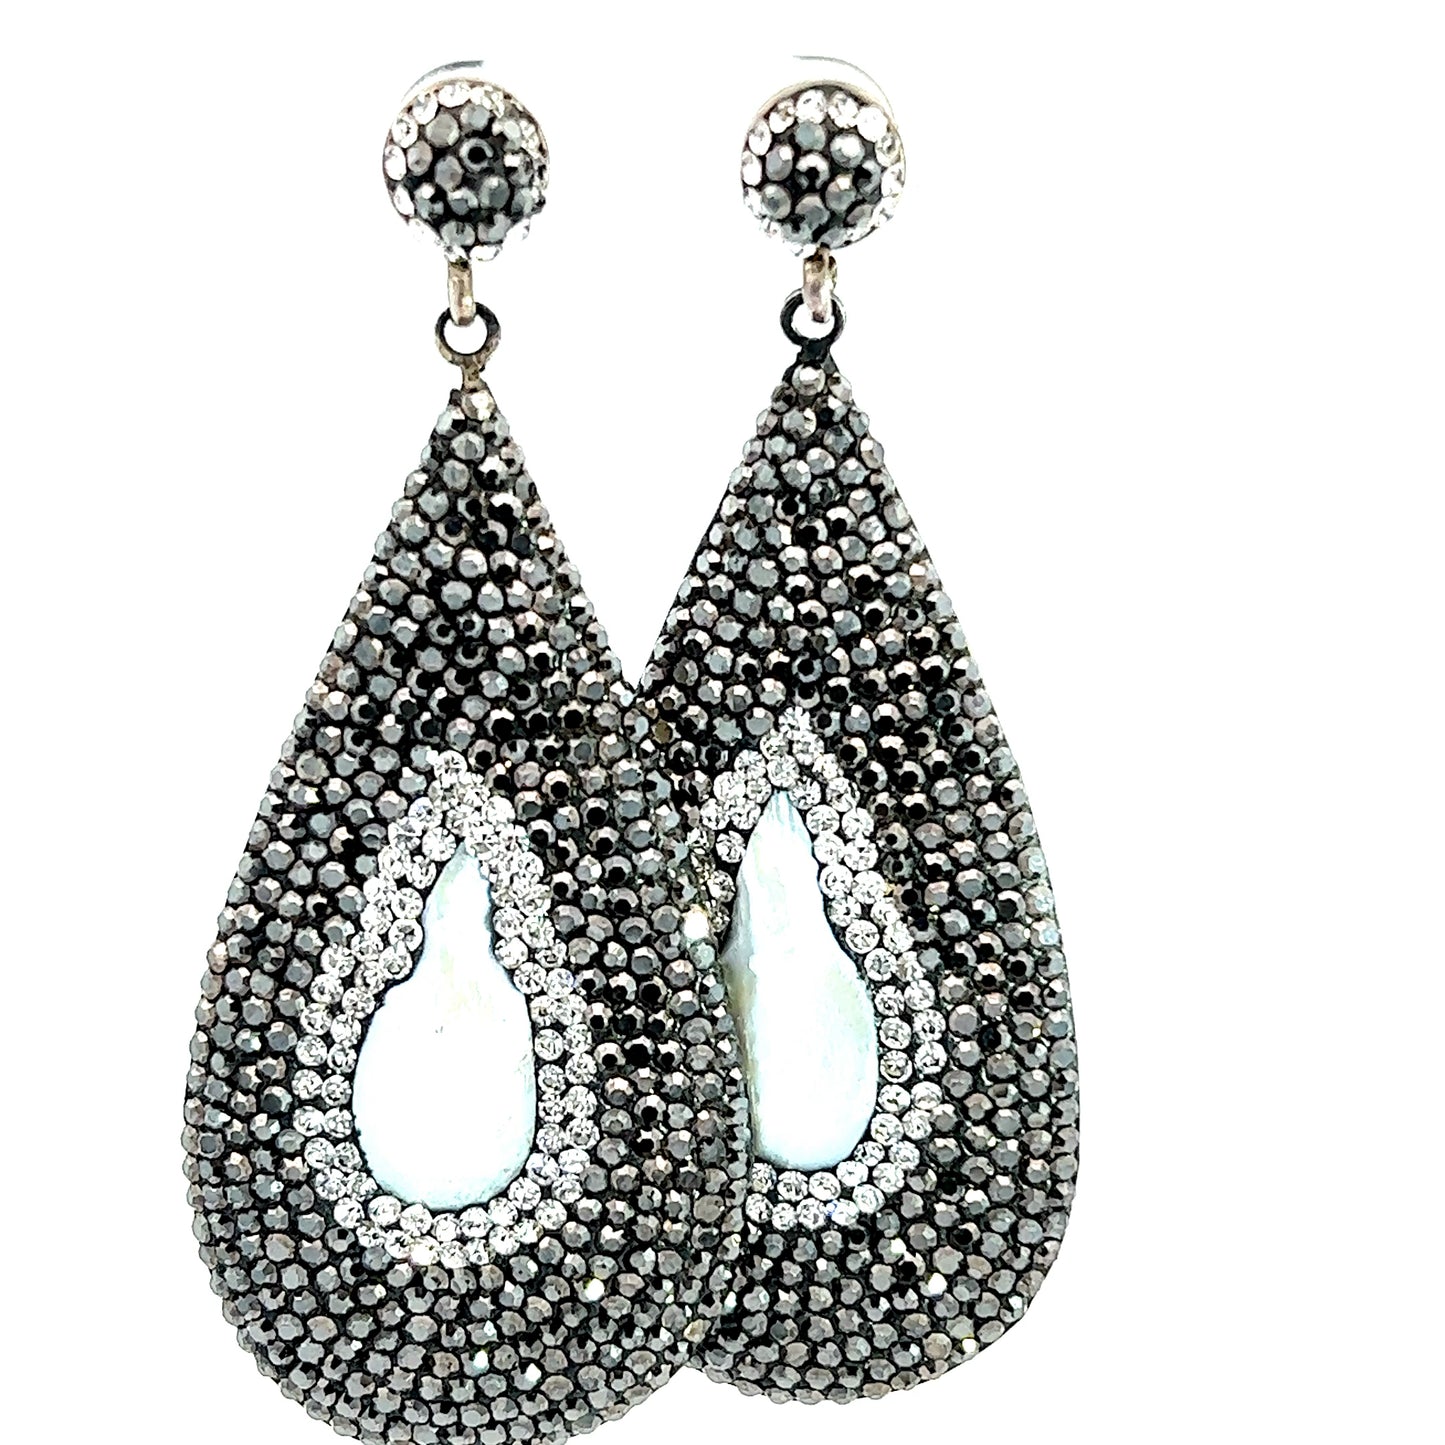 Black and Pearl Crystal Teardrop Earring - Born To Glam